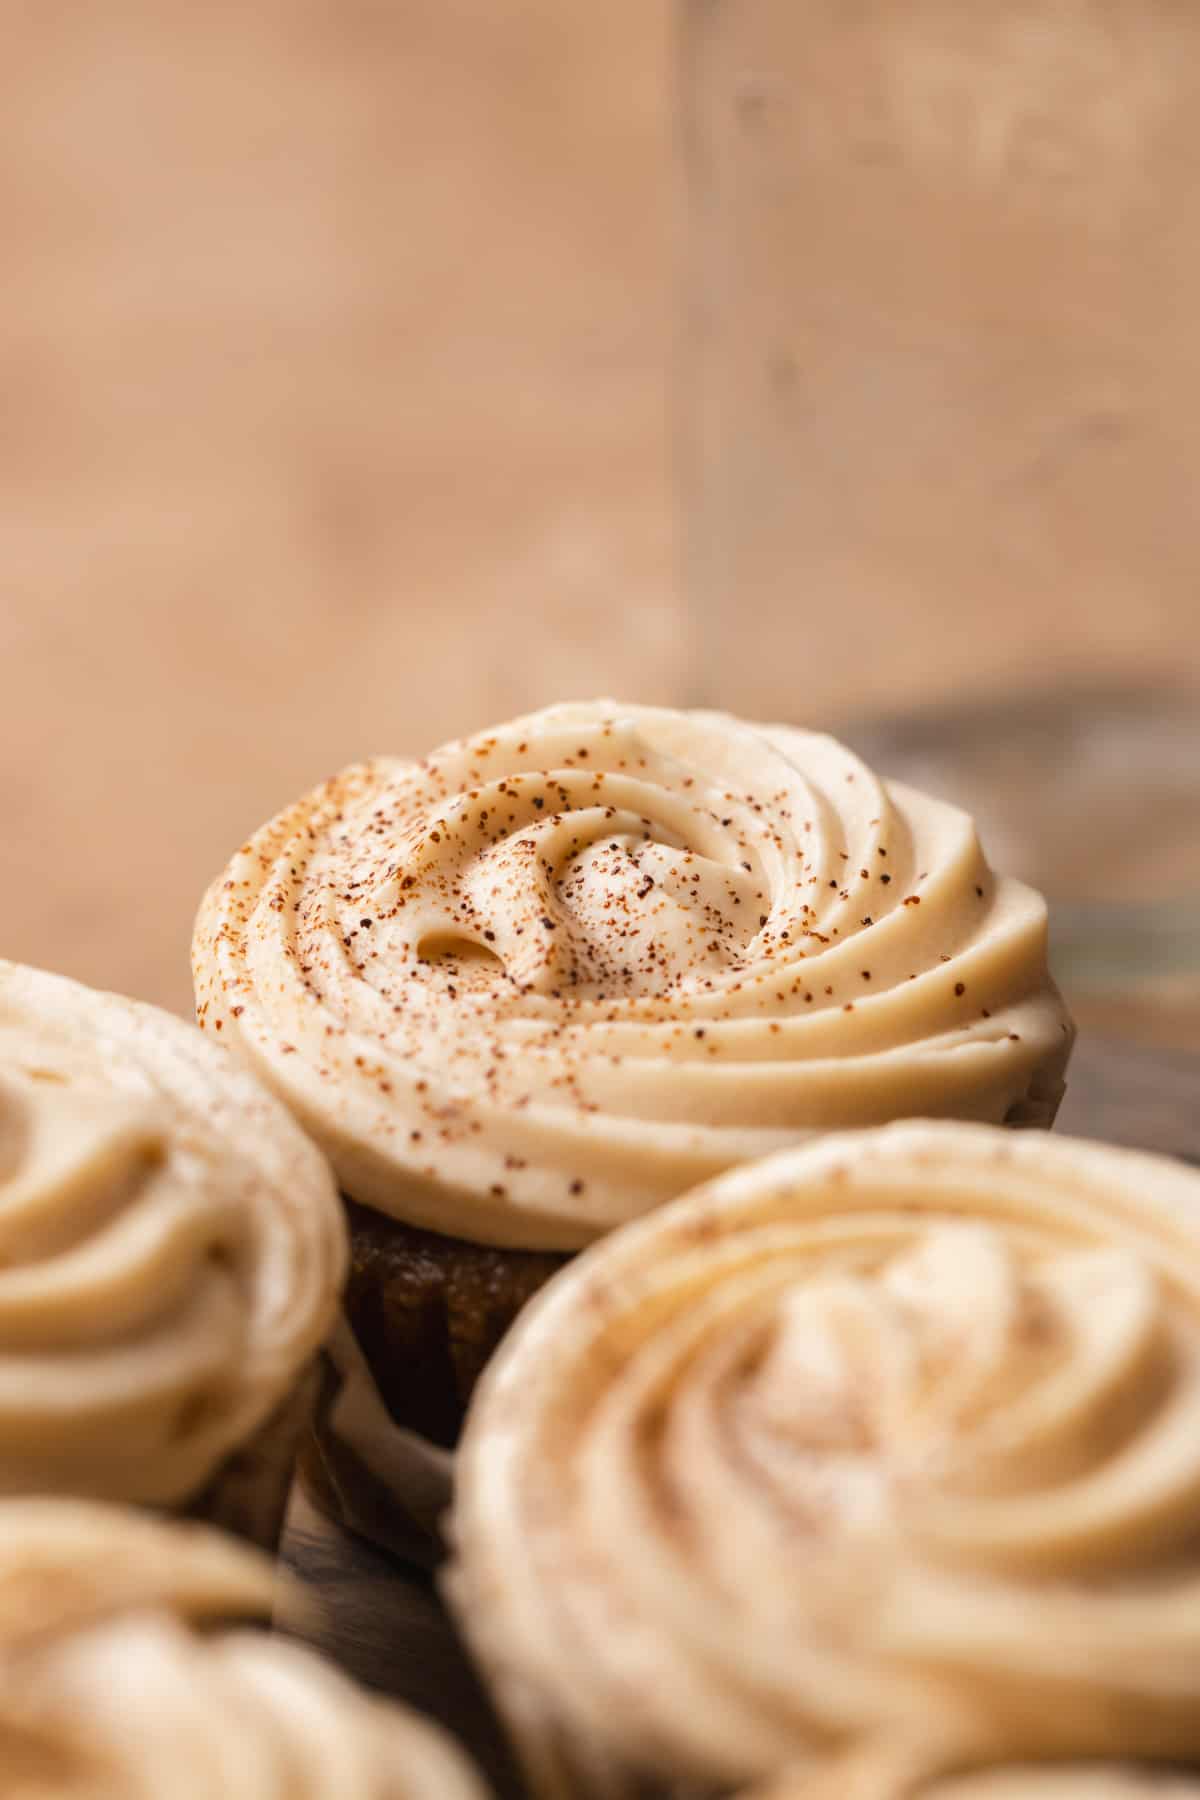 A close up of a cupcake dusted with espresso powder.